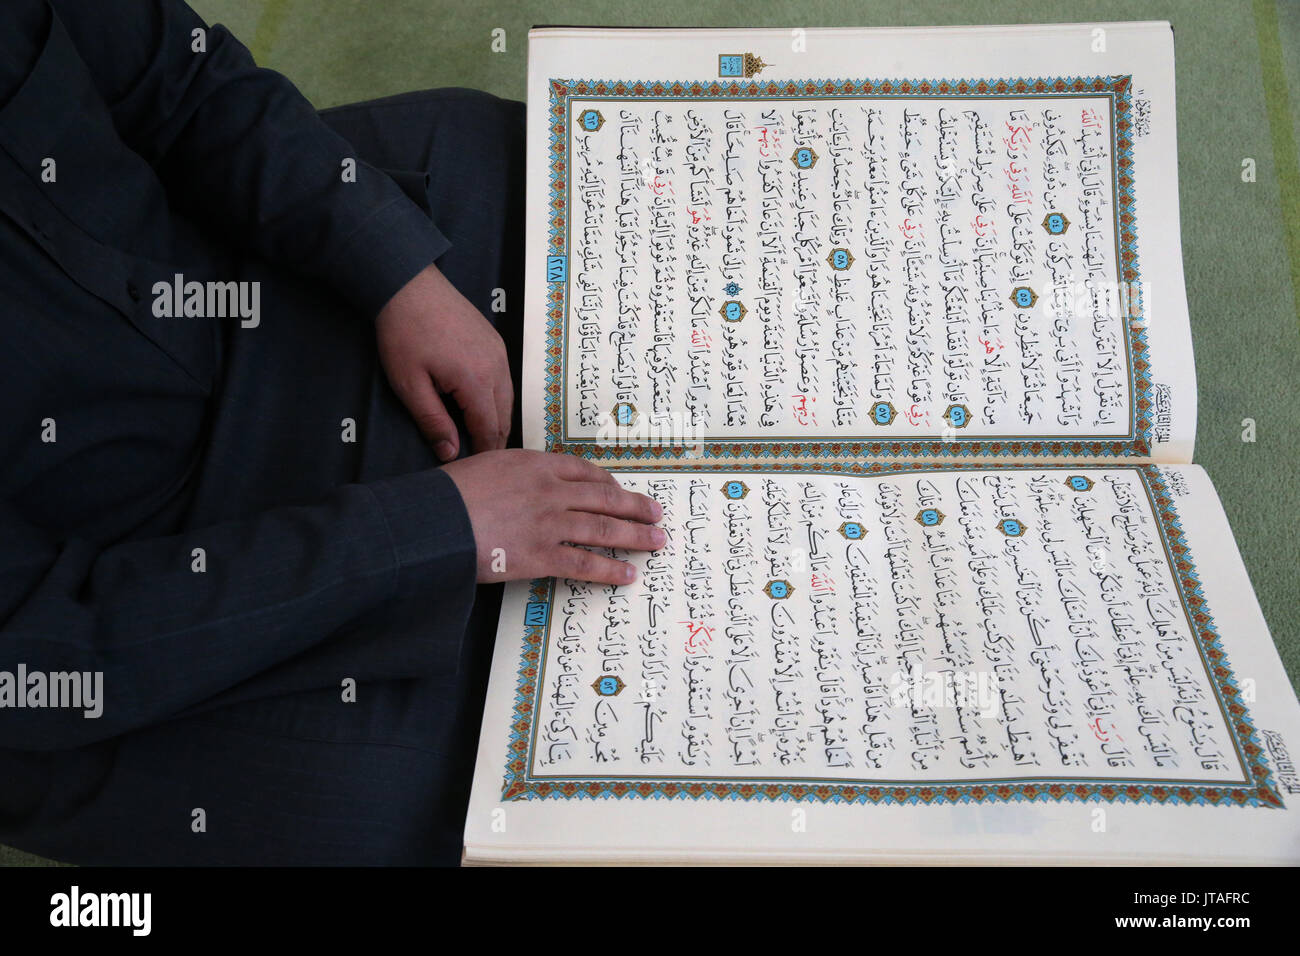 Imam reading the Quran in a mosque, Seine-e-Marne, France, Europe Stock Photo